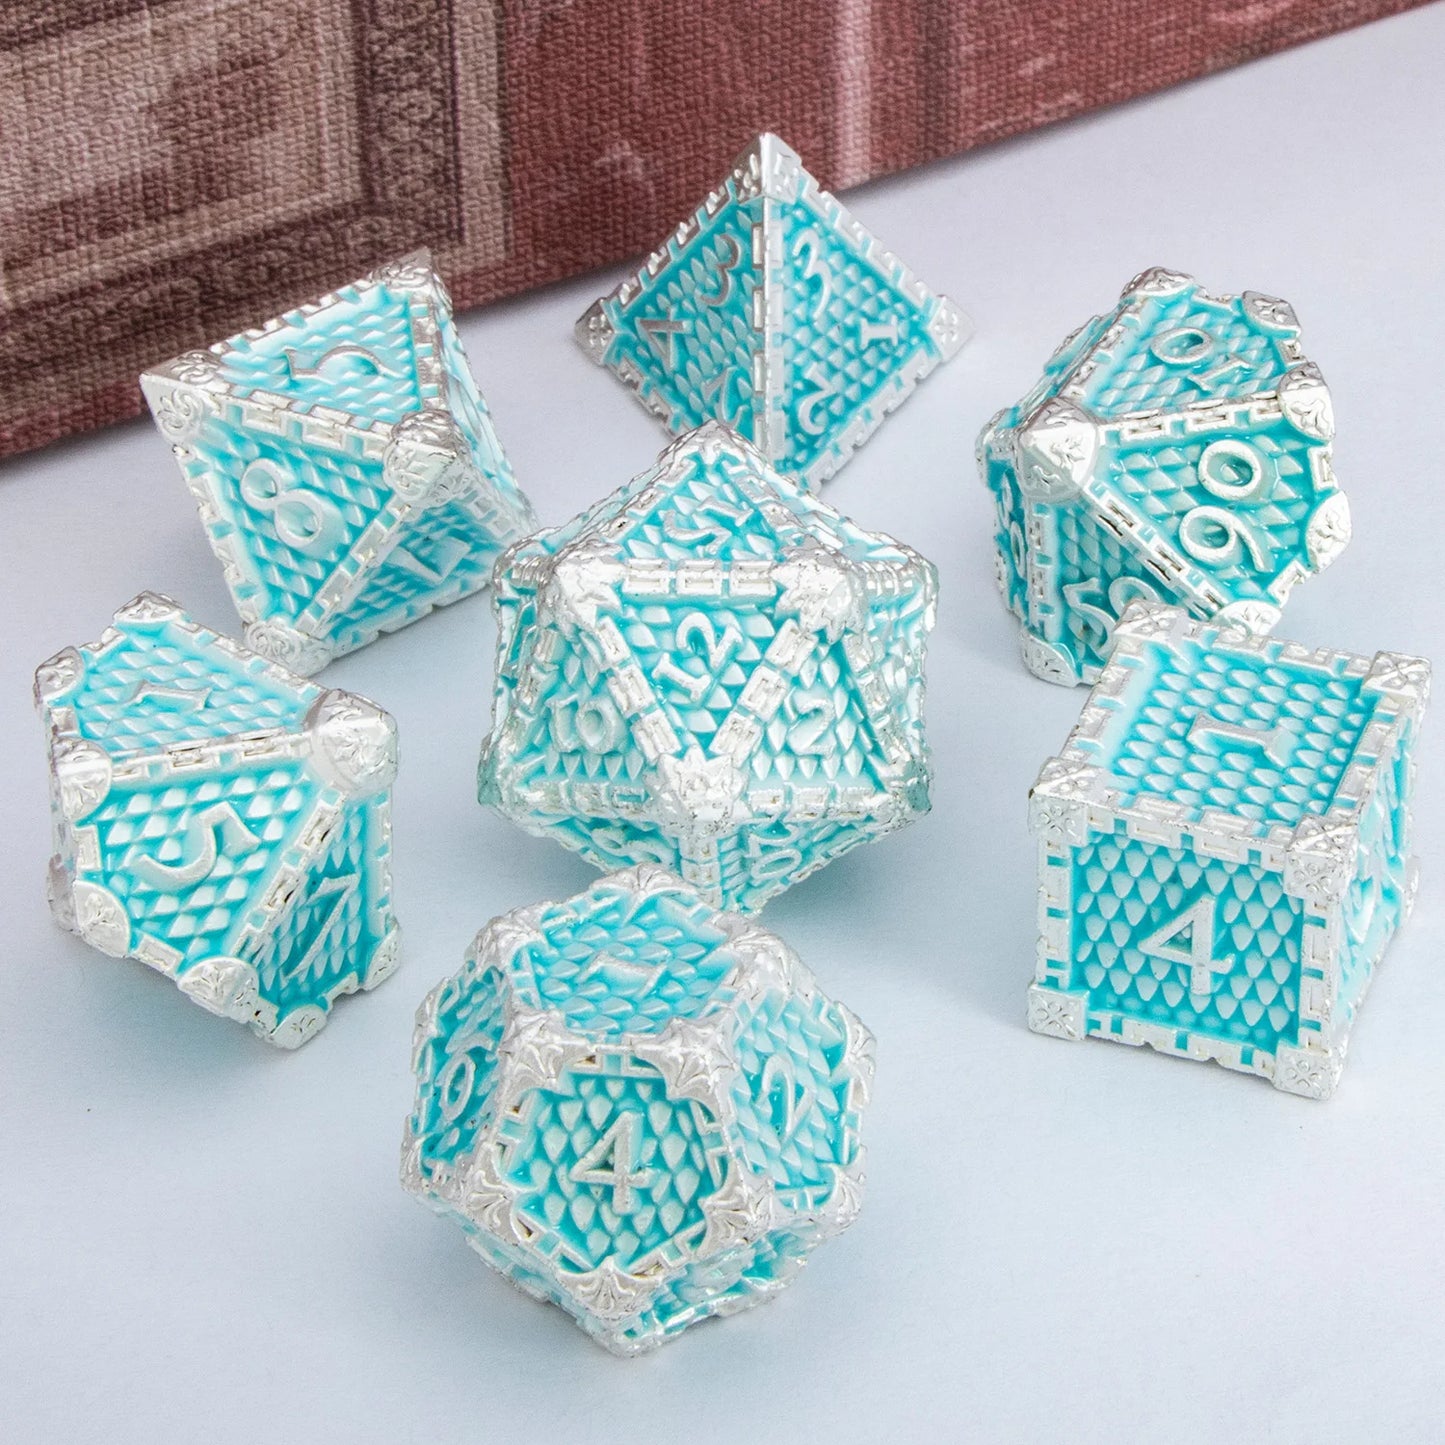 DND Metal Dice Set Dragon Scale Blood D&D Dice Dungeon and Dragon Role Playing Games Polyhedral Dice RPG D and D Dice Silver Blue